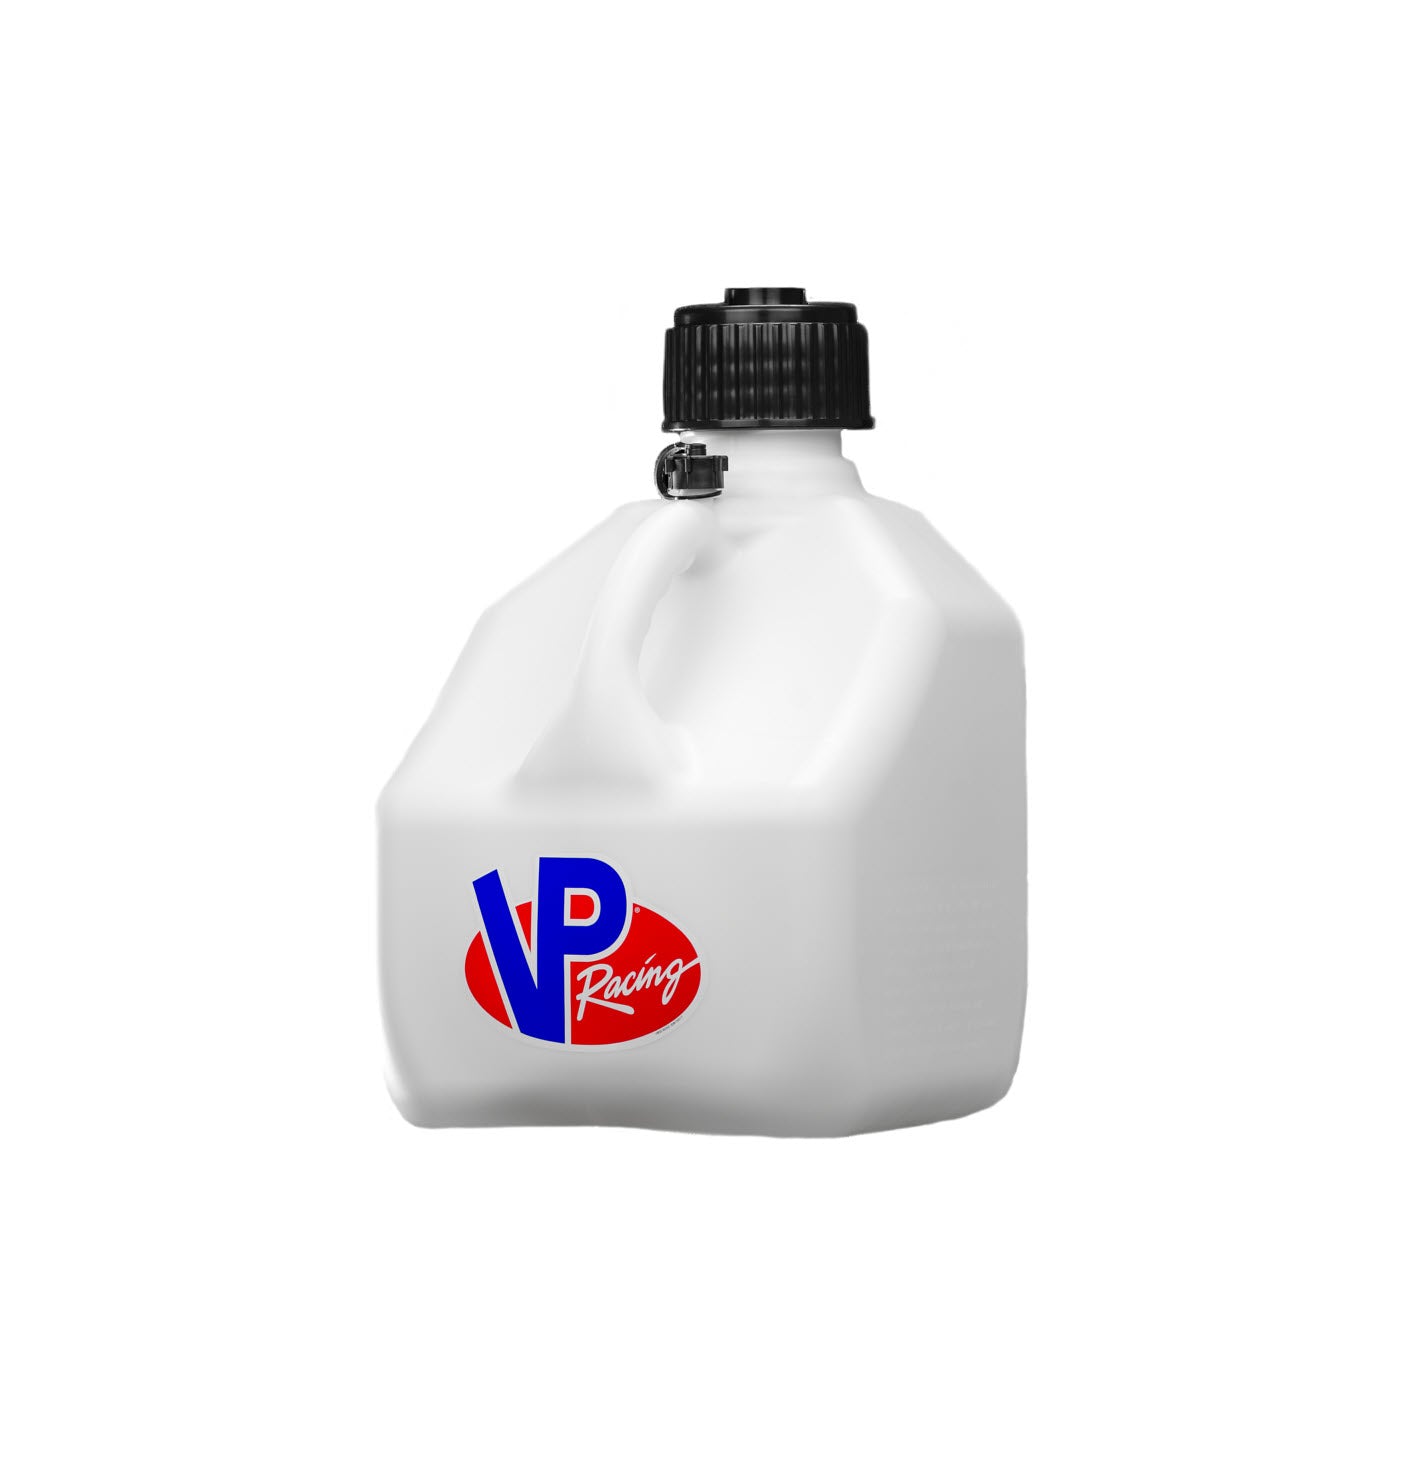 VP Racing 3-Gallon Motorsport Container - White Jug, Black Cap - Dirty Racing Products